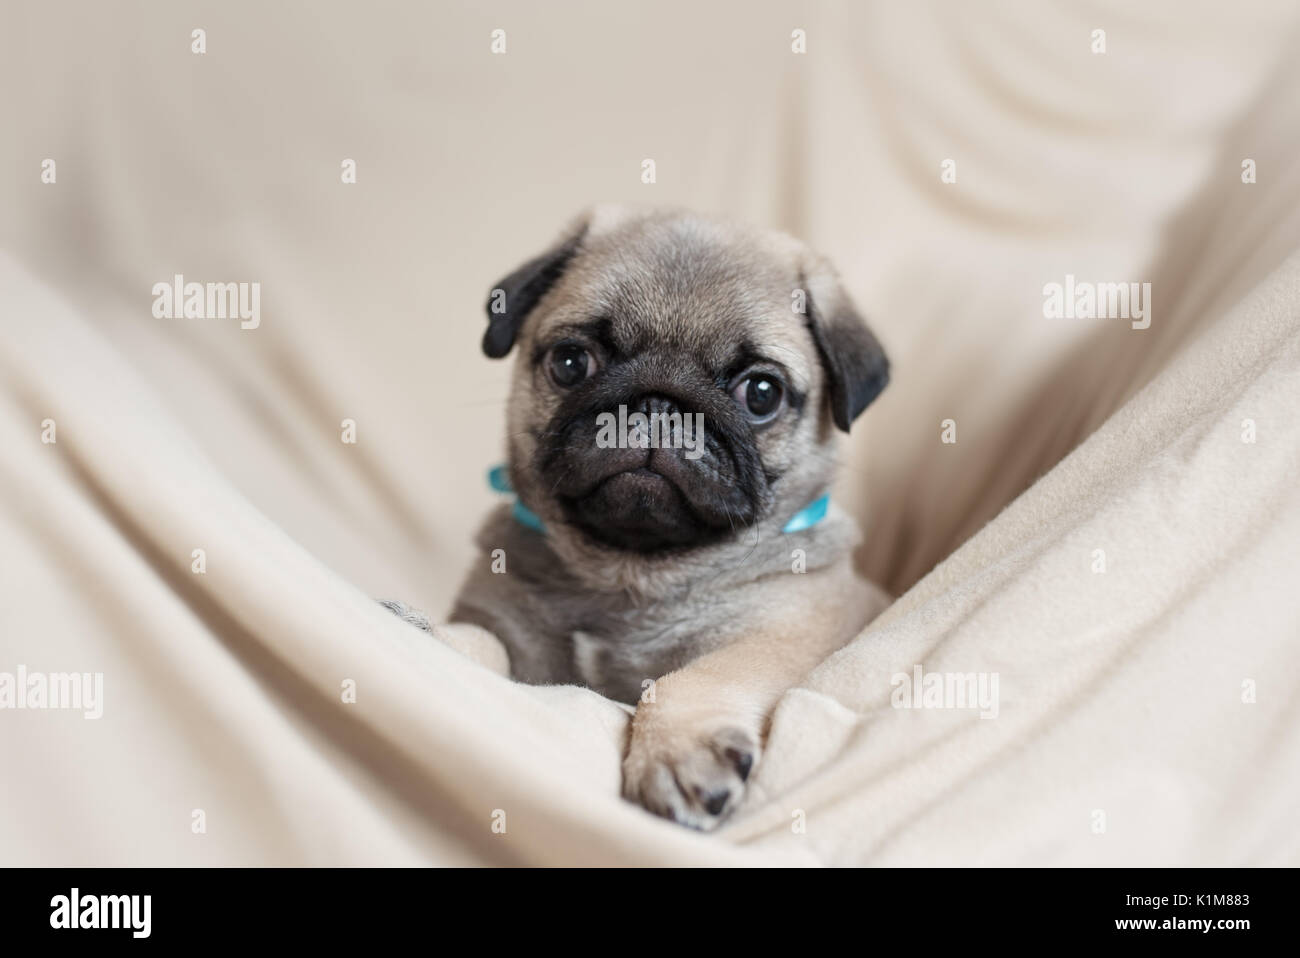 Cute pug puppy sitting on delicate material. Pug puppy have cute eyes and paws. Stock Photo